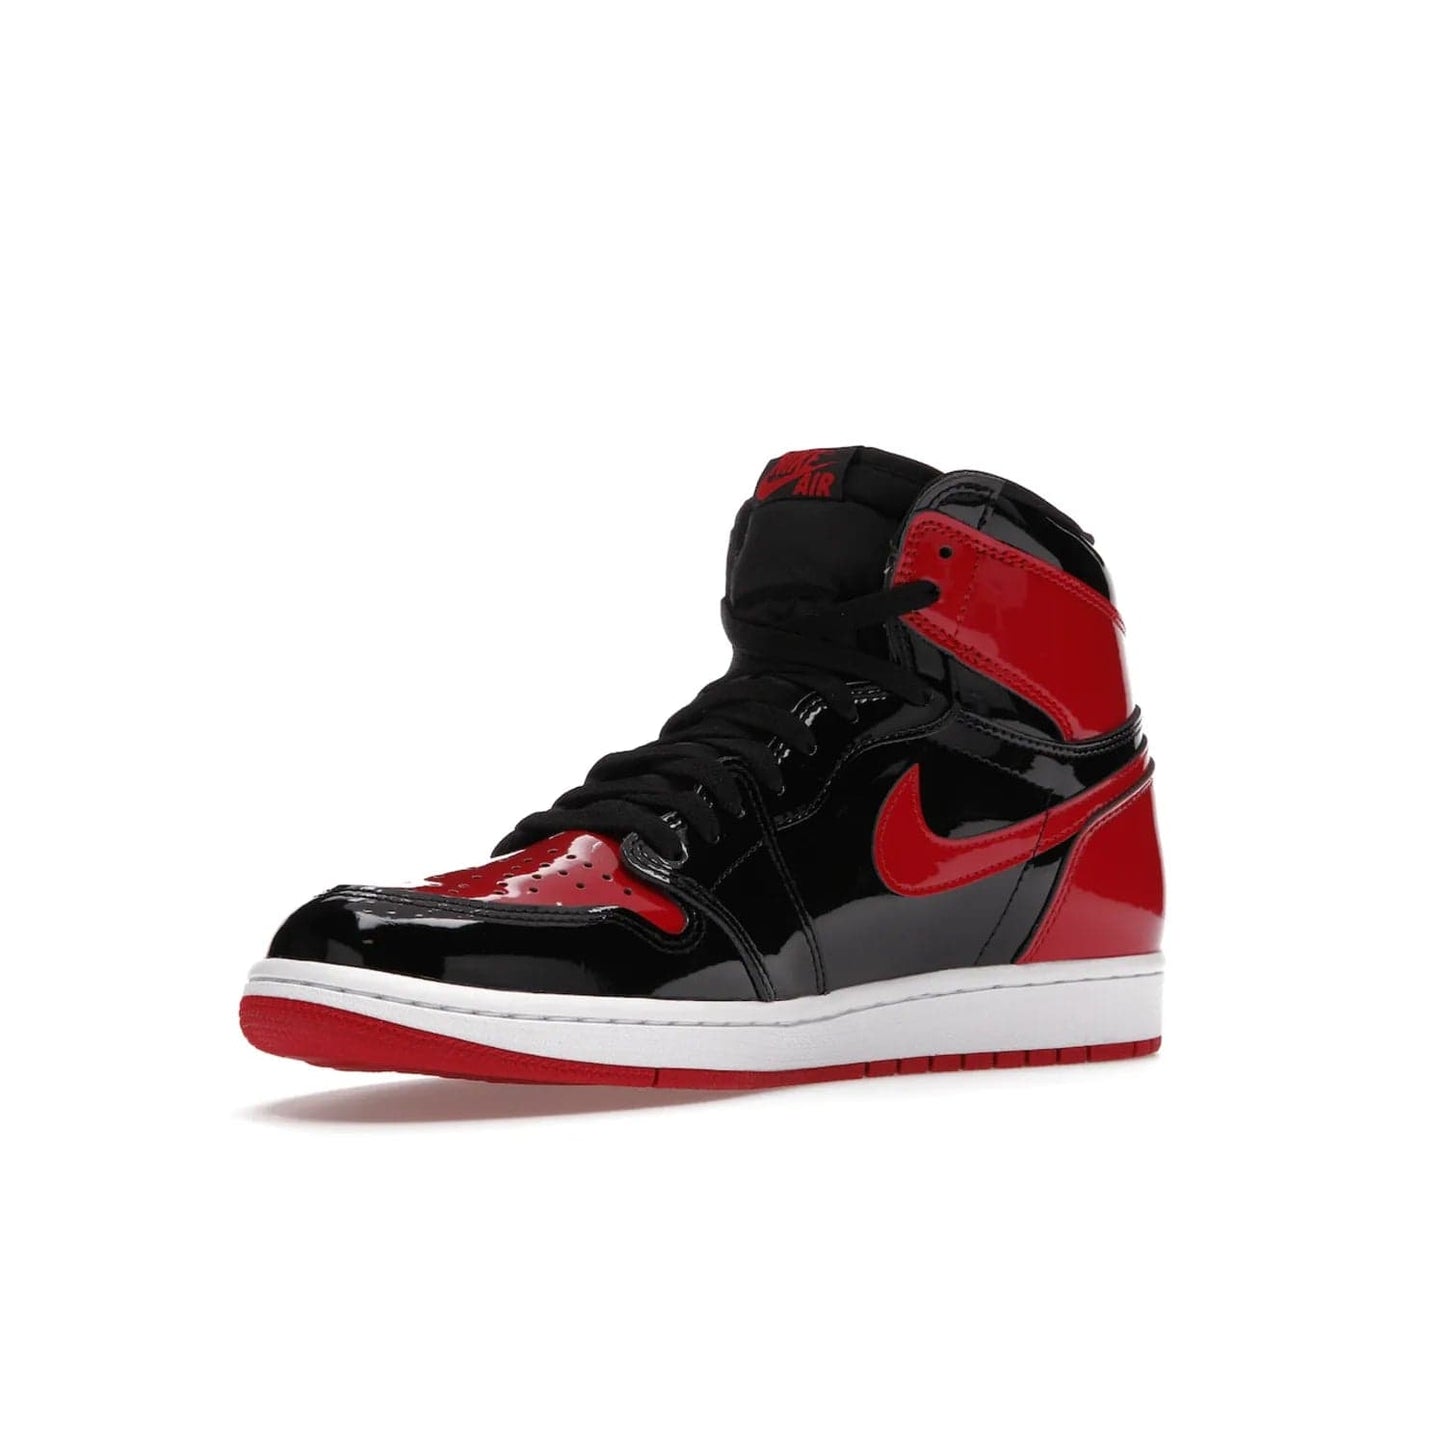 Jordan 1 Retro High OG Patent Bred - Image 15 - Only at www.BallersClubKickz.com - Introducing Air Jordan 1 Retro High OG Patent Bred - sleek patent leather upper, signature weaved Nike Air tongue and classic Wings logo on collar. Red and white sole complete signature look. Releasing December 2021 - perfect retro edition for holidays.